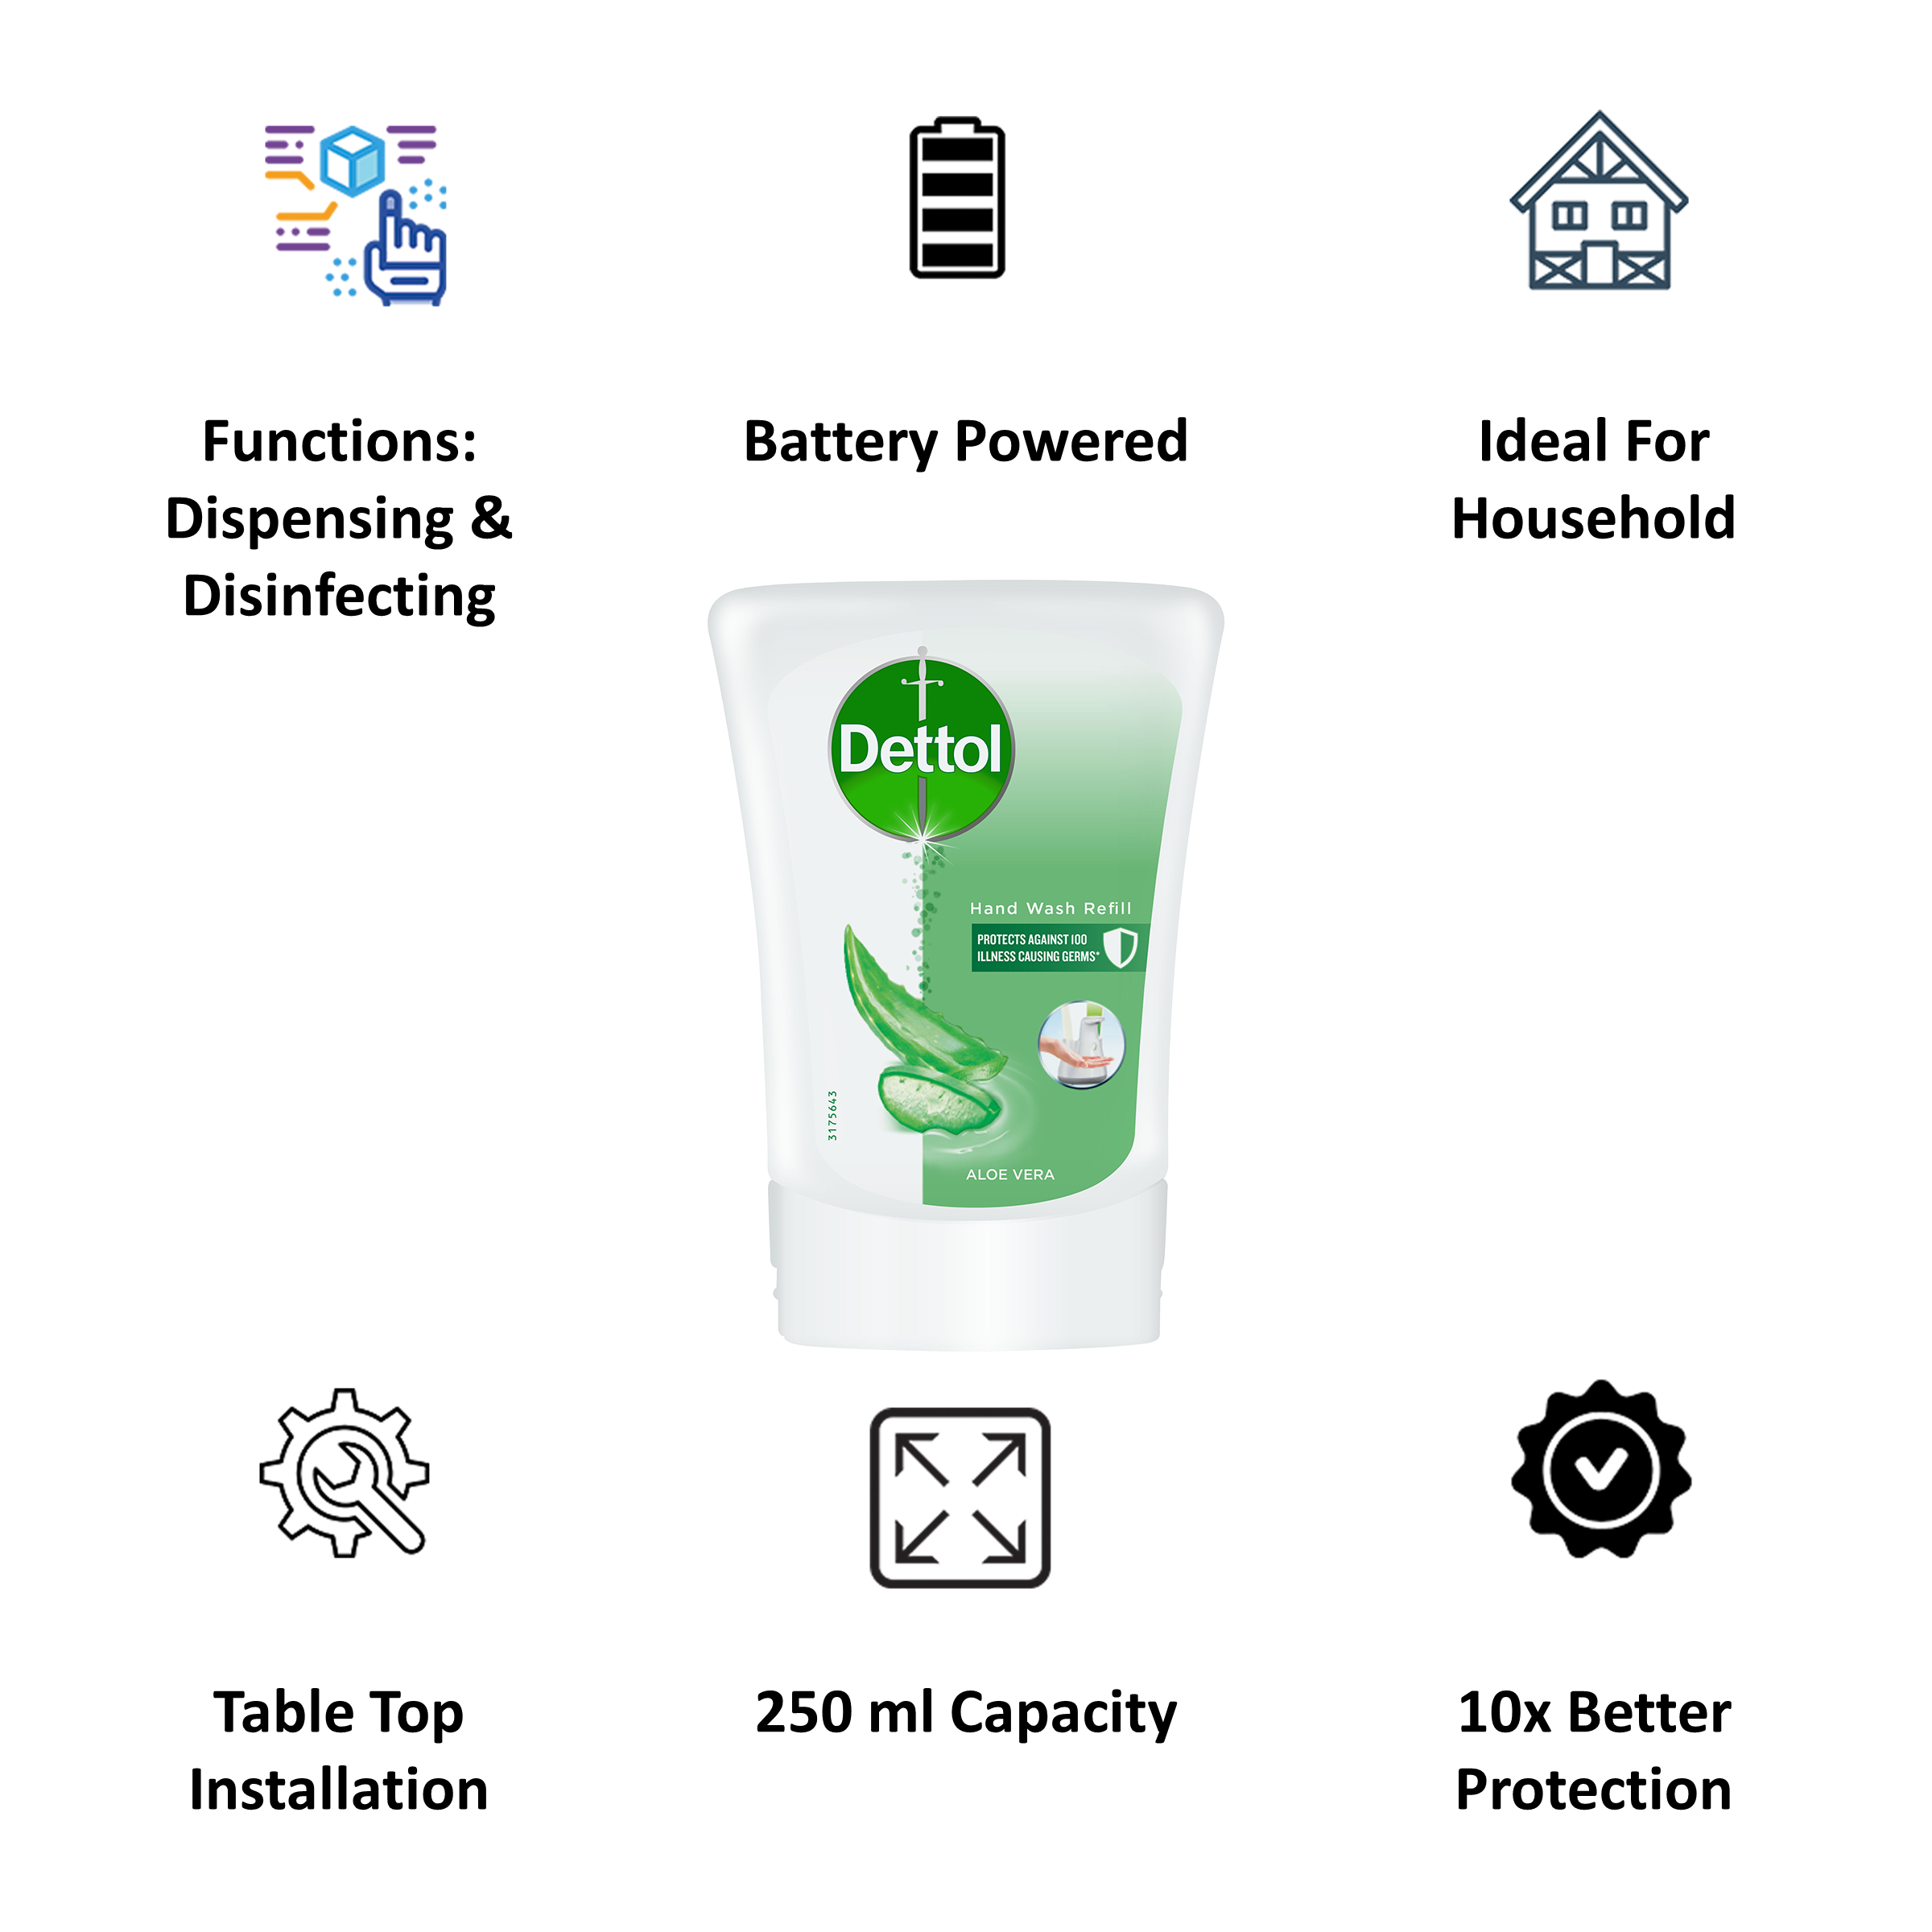 Buy Dettol No-Touch Automatic Handwash Refill (250 ml Capacity